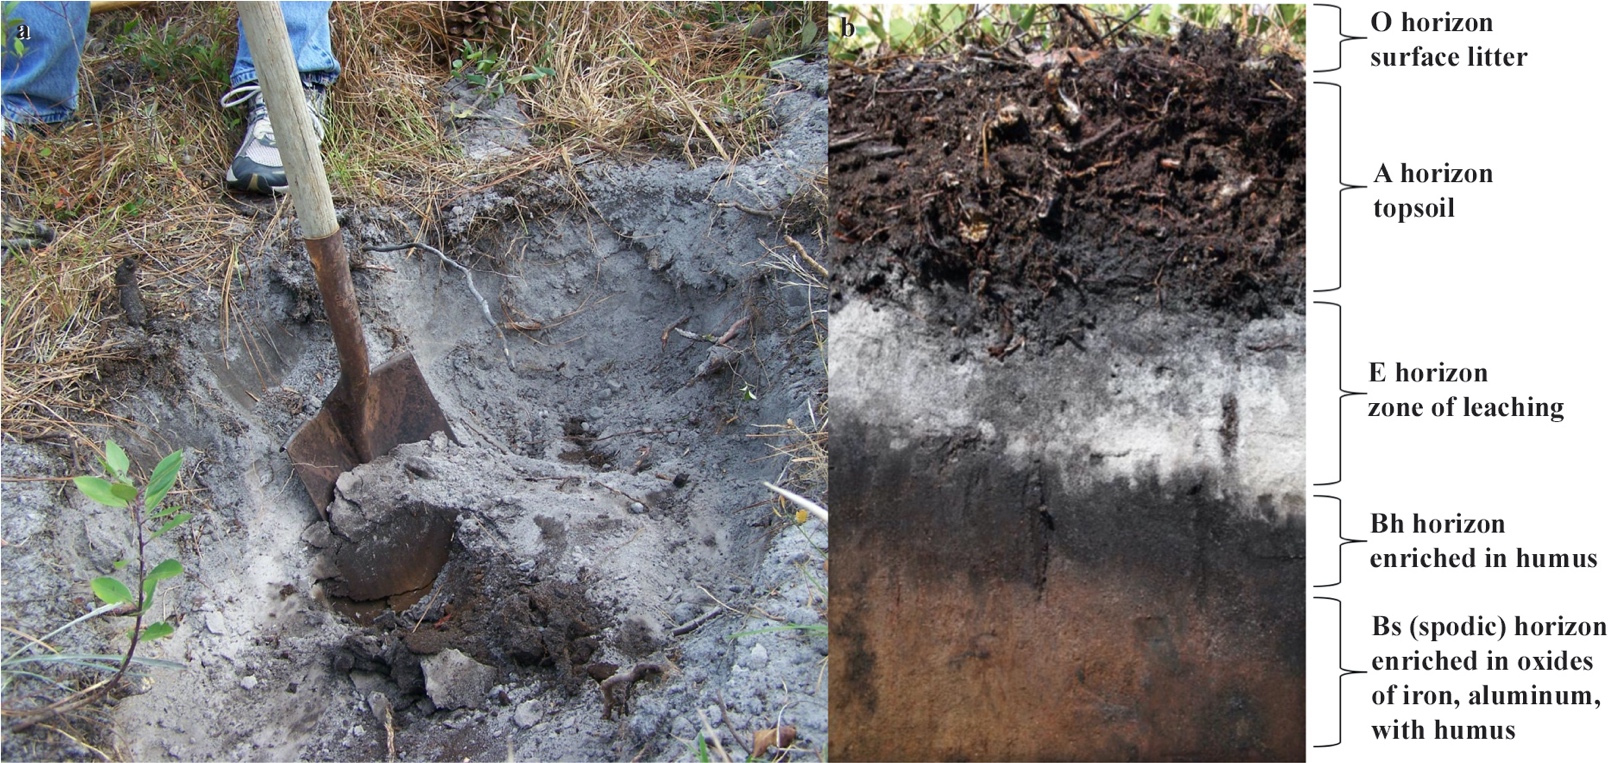 On the left is a picture of a shovel digging into a Spodosol exposing the white-grey sandy horizon as well as minimal material from the spodic horizon. On the right is a soil profile of a spodosol found in an undisturbed pine forest. The dark brown/black horizon underneath the whitish/grey horizon is the portion of the soil that is commonly mistaken for good organic soil for constructed landscape rootzones (right photo). Image credit: Dara Park (left) and John Kelley (right).